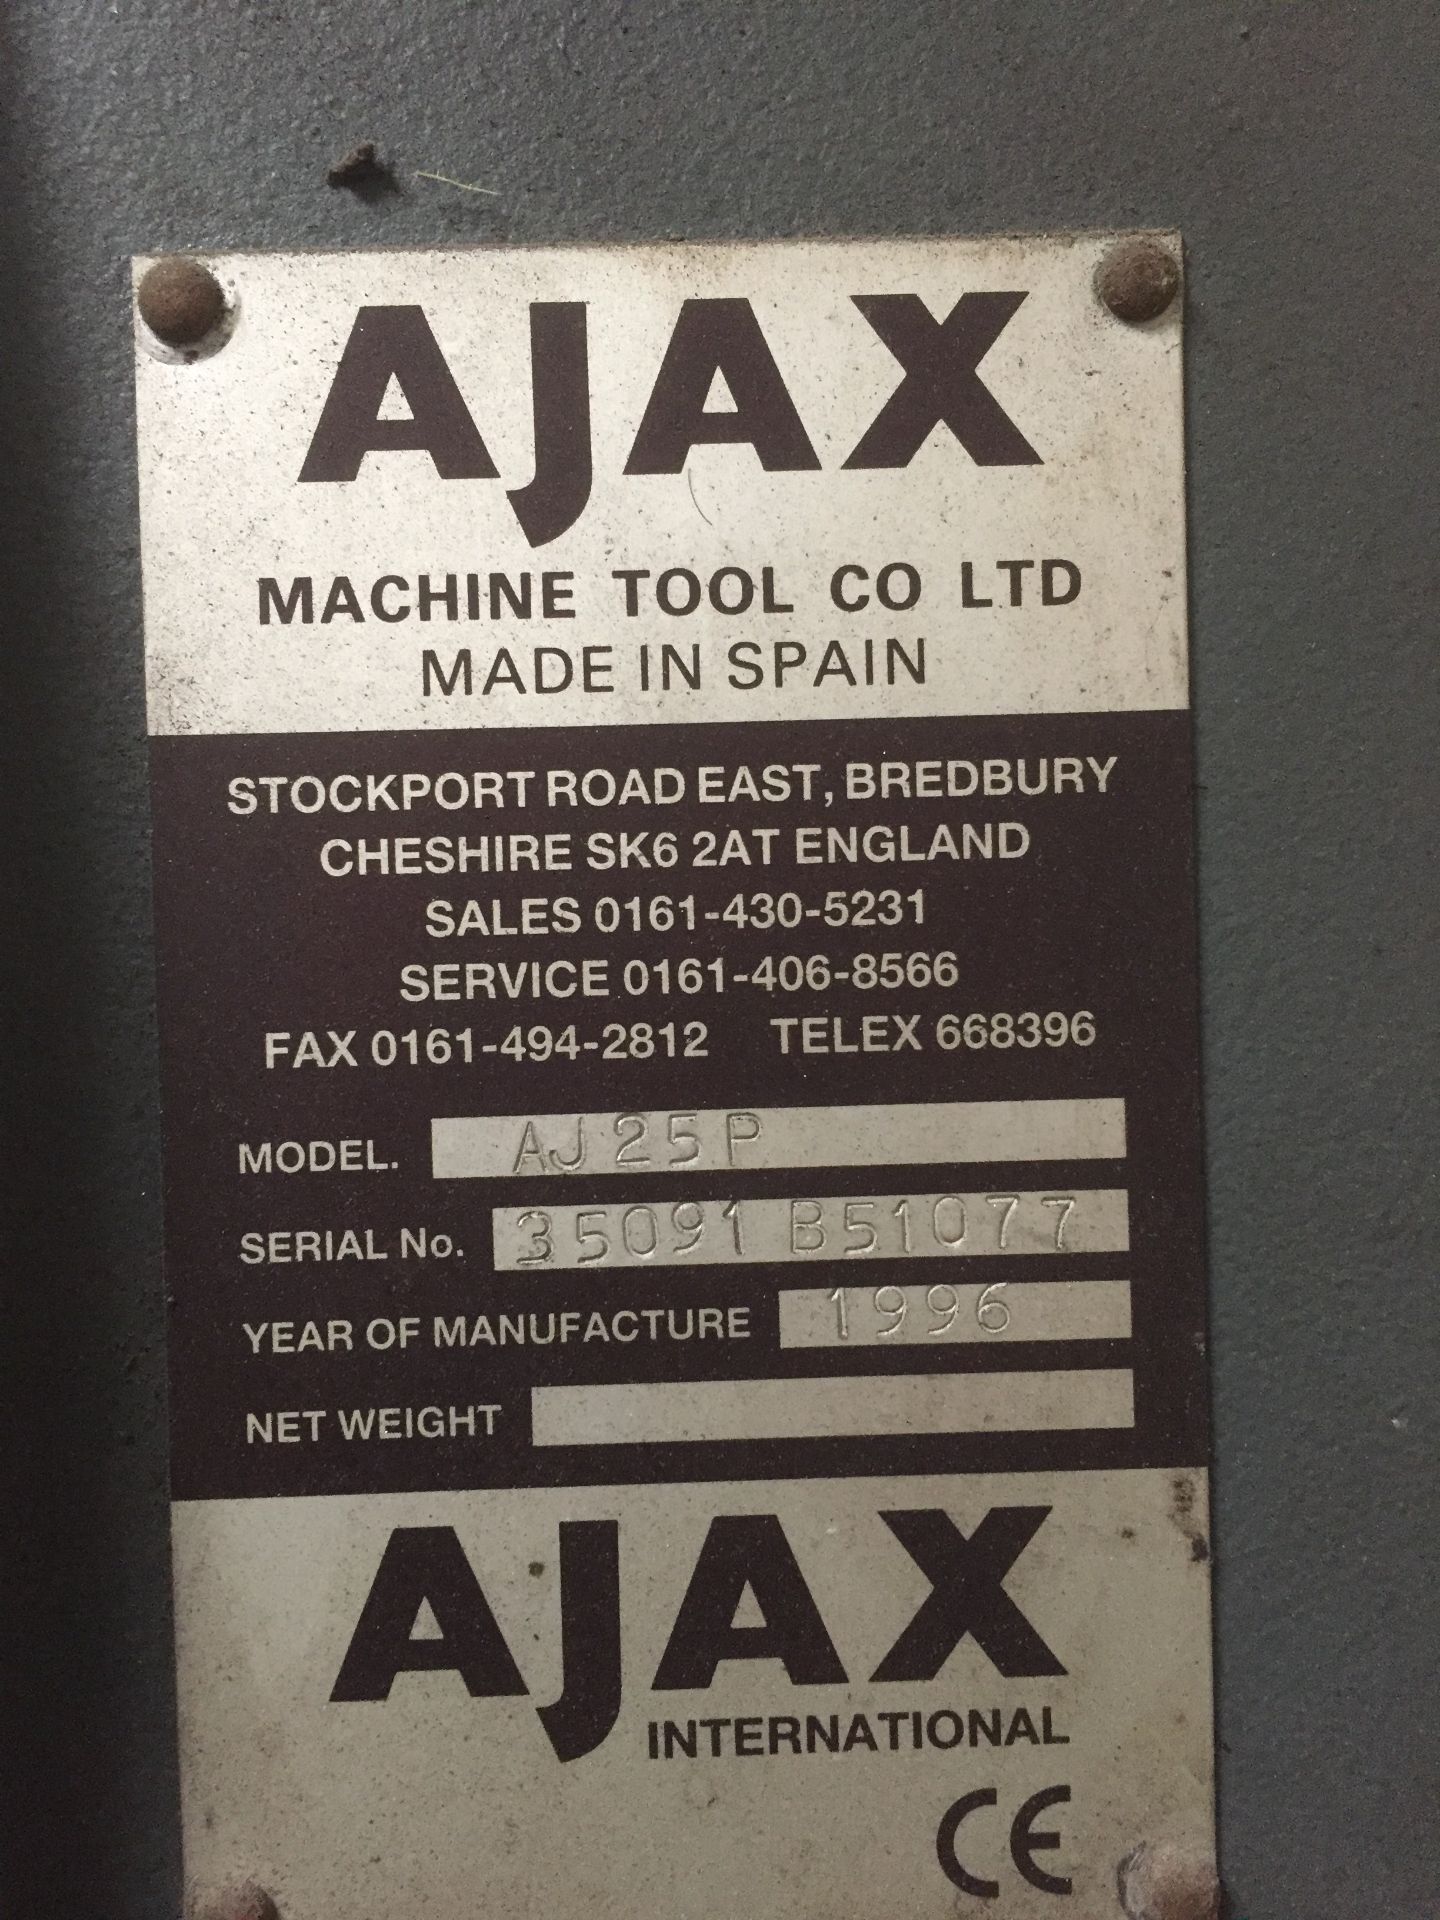 Ajax AJ25P vertical pillar drill, Serial No. 35091 B51077 (1996), 110v **This lot is located at - Image 2 of 2